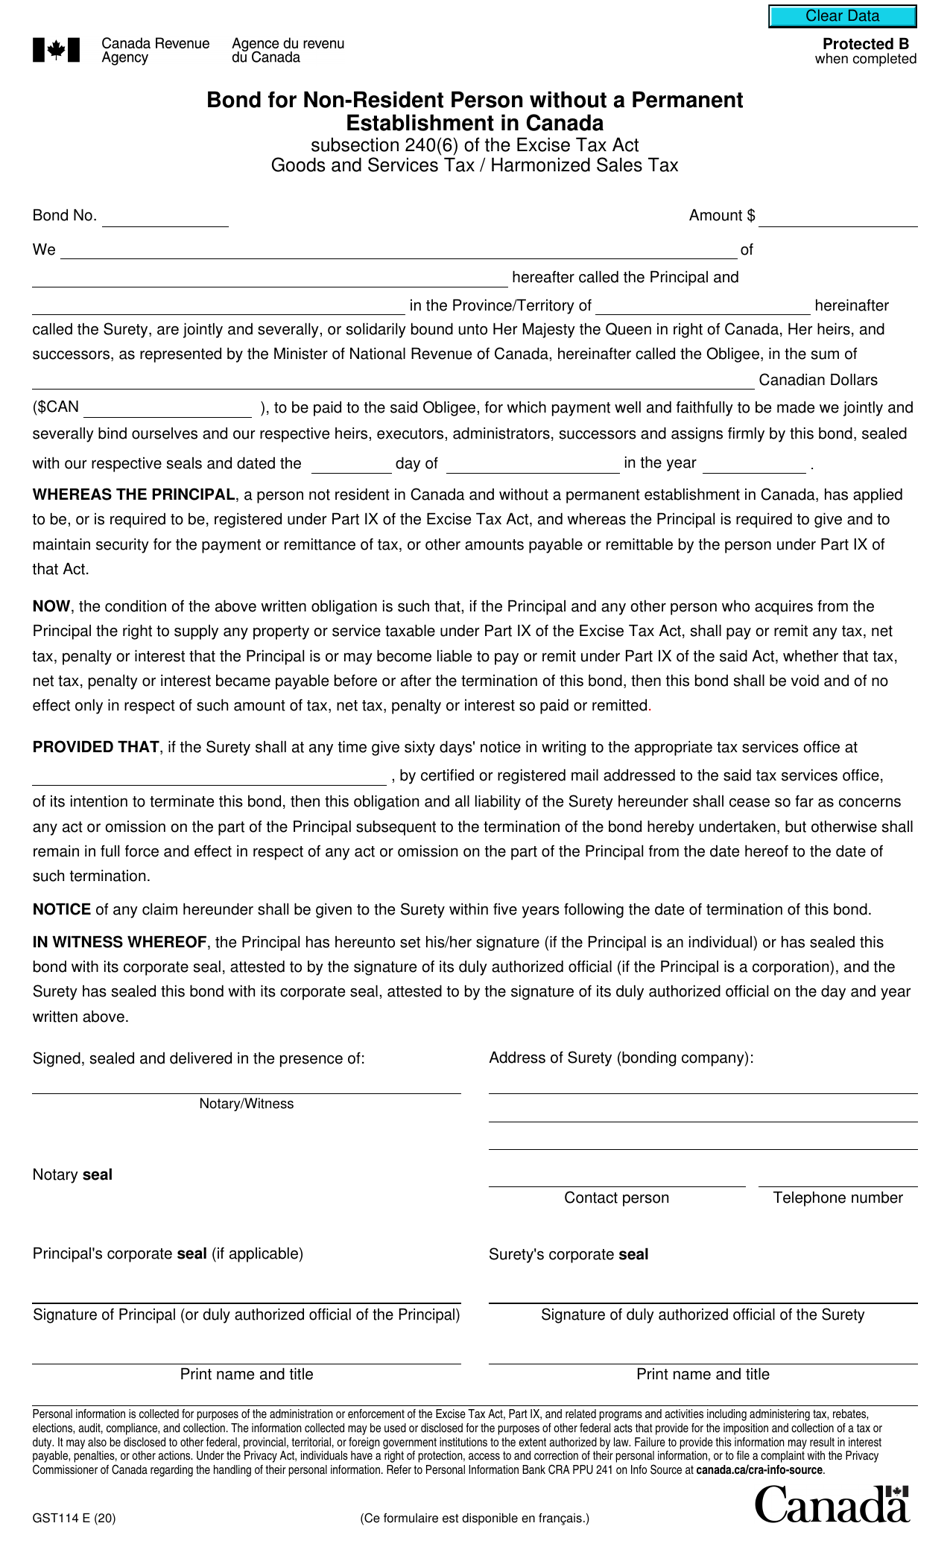 Form GST114 Bond for Non-resident Person Without a Permanent Establishment in Canada - Canada, Page 1